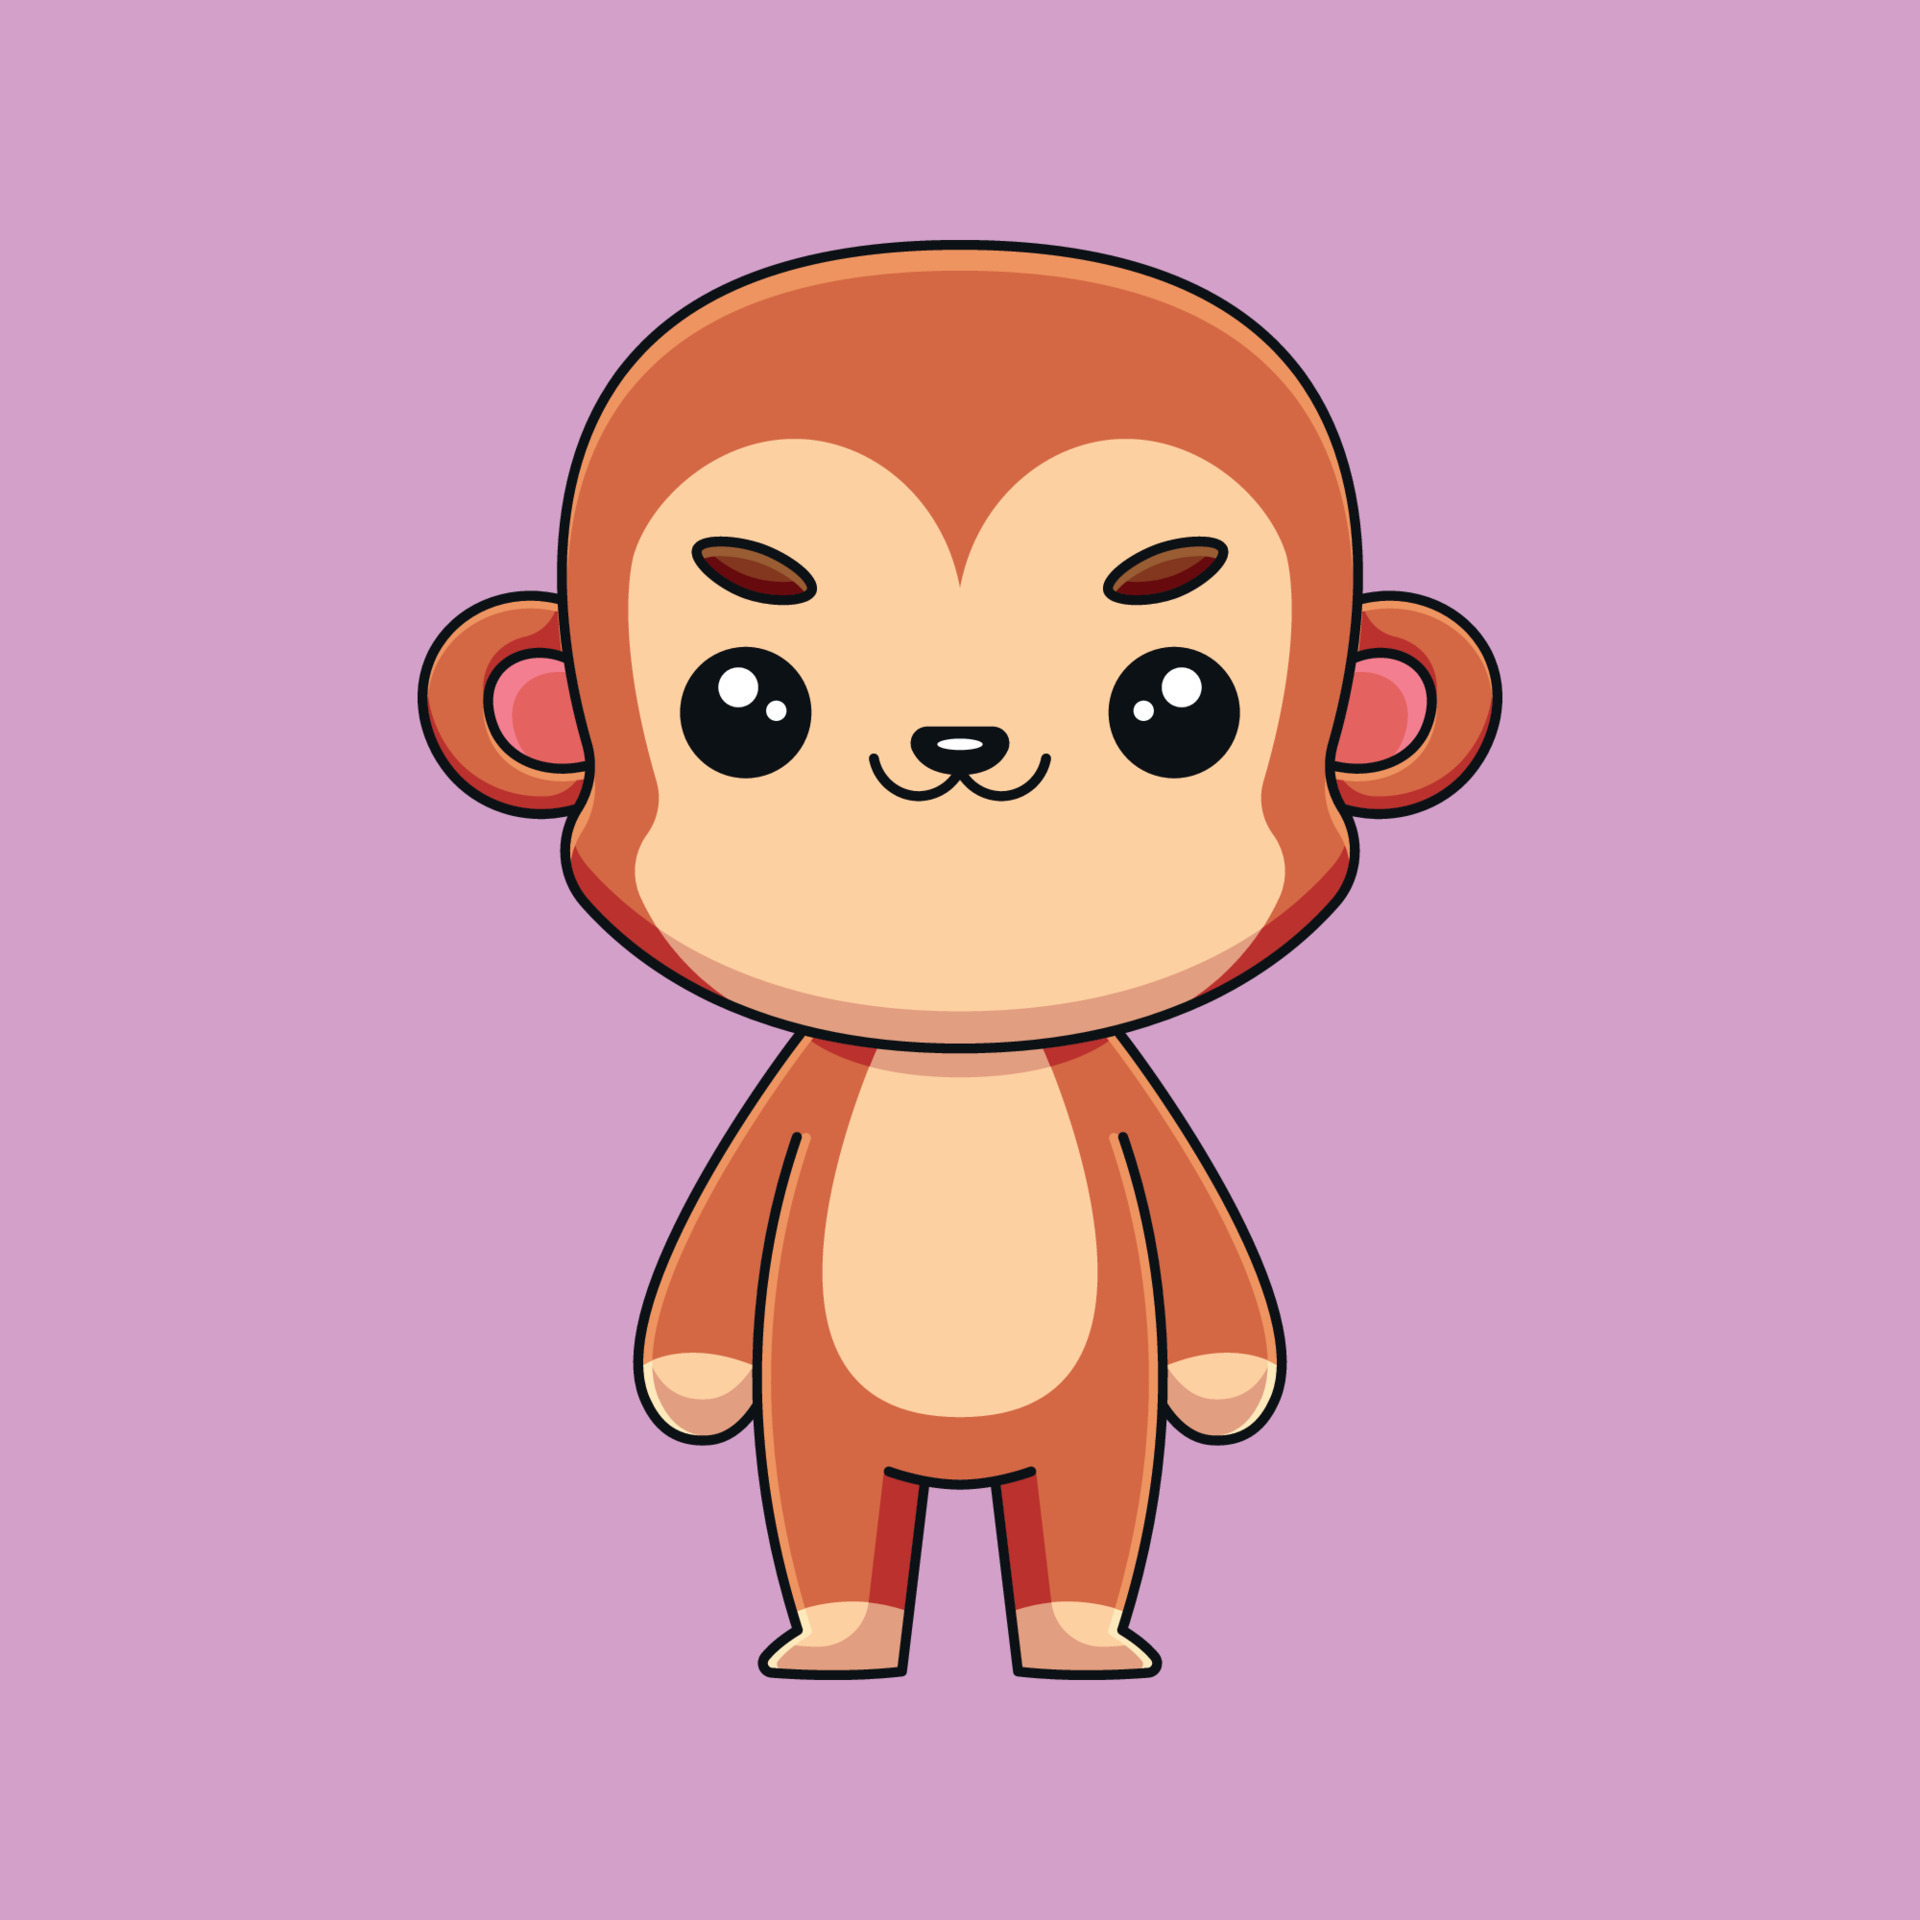 Monkey Drawing Tutorial  How to draw Monkey step by step